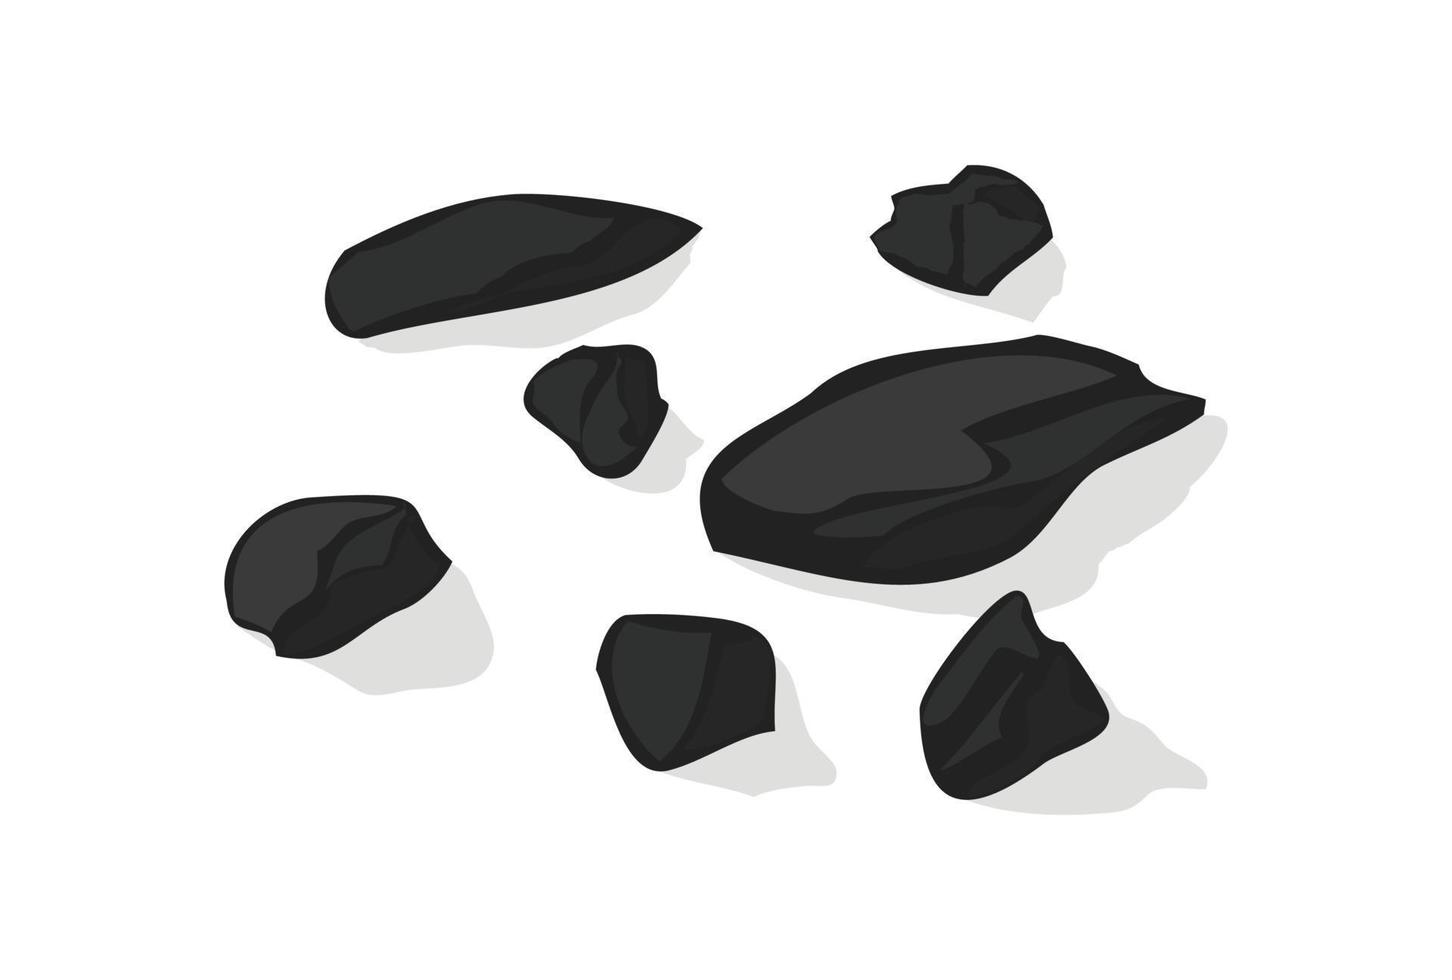 Stones and rocks vector illustration on white background. Set of different boulders